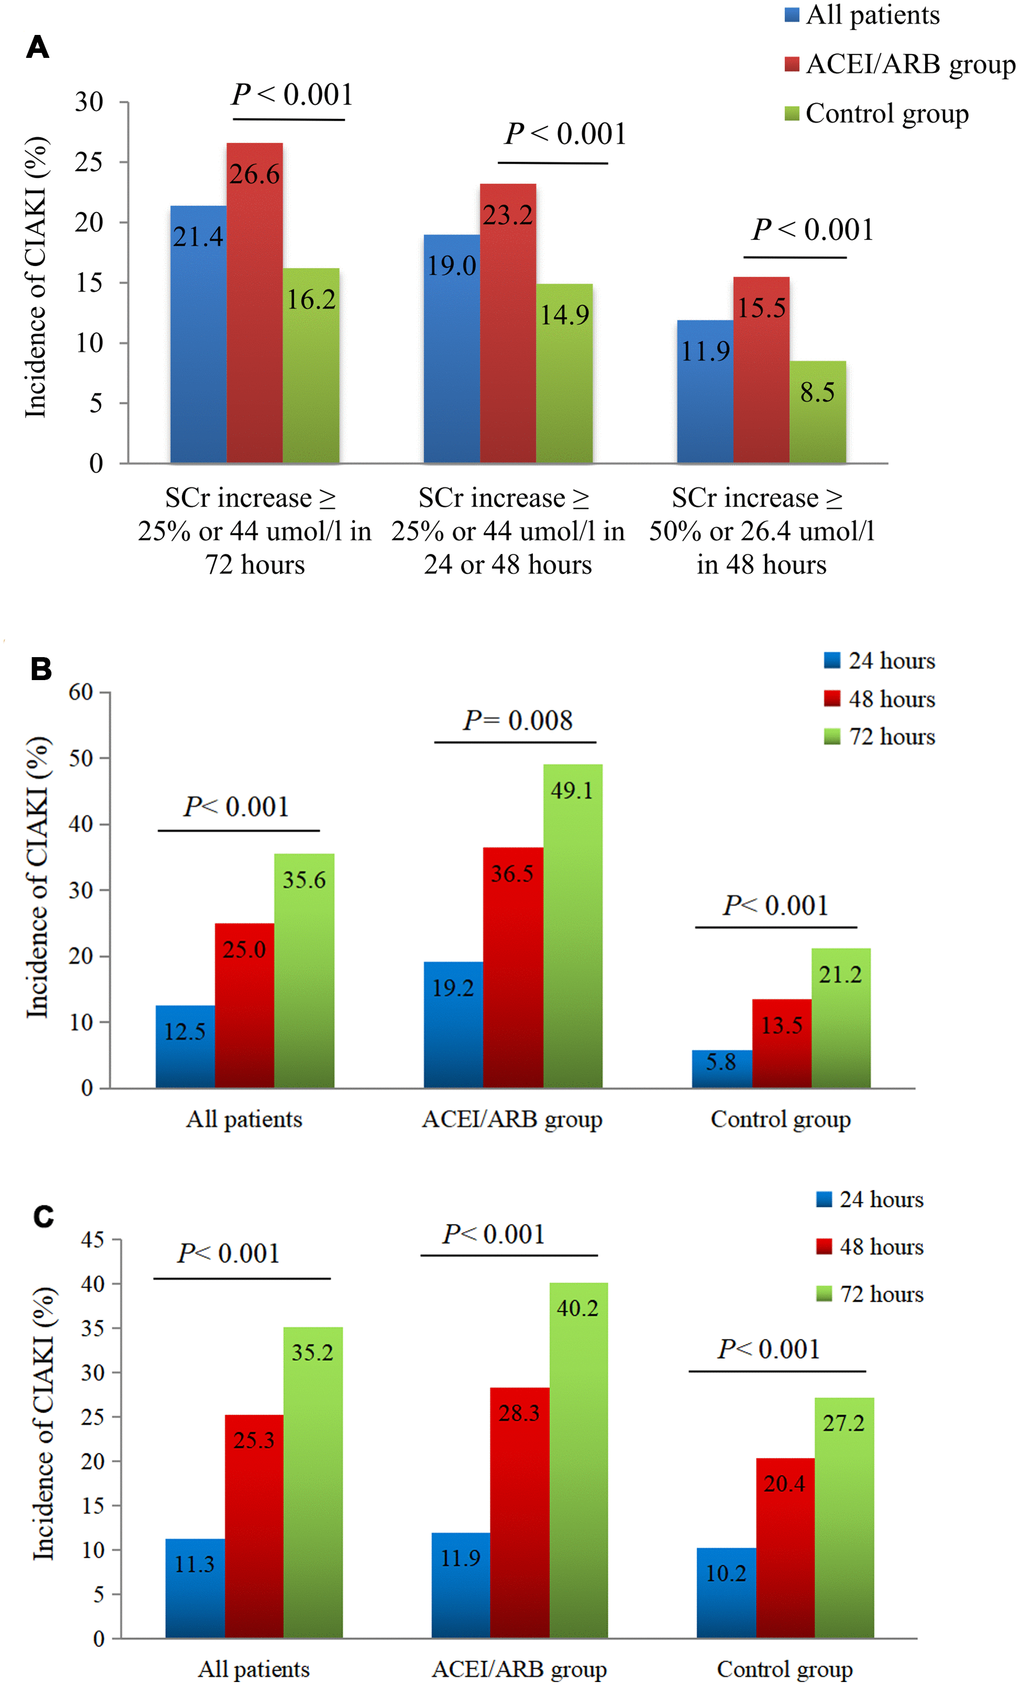 Impact of RAAS inhibition on CIAKI incidence. (A) Incidence of CIAKI in the PSM-matched cohort under different definitions. (B) Incidence of CIAKI in the matched cohort at different times post-CAG/PCI. We screened 52/704 pairs of patients within the PSM-matched cohort who had serum creatinine values documented at 24, 48, and 72 h post-procedure. (C) Incidence of CIAKI in the unmatched cohort at different times post-CAG/PCI. We screened 613/2240 patients who had serum creatinine values documented at 24, 48, and 72 h post-procedure.